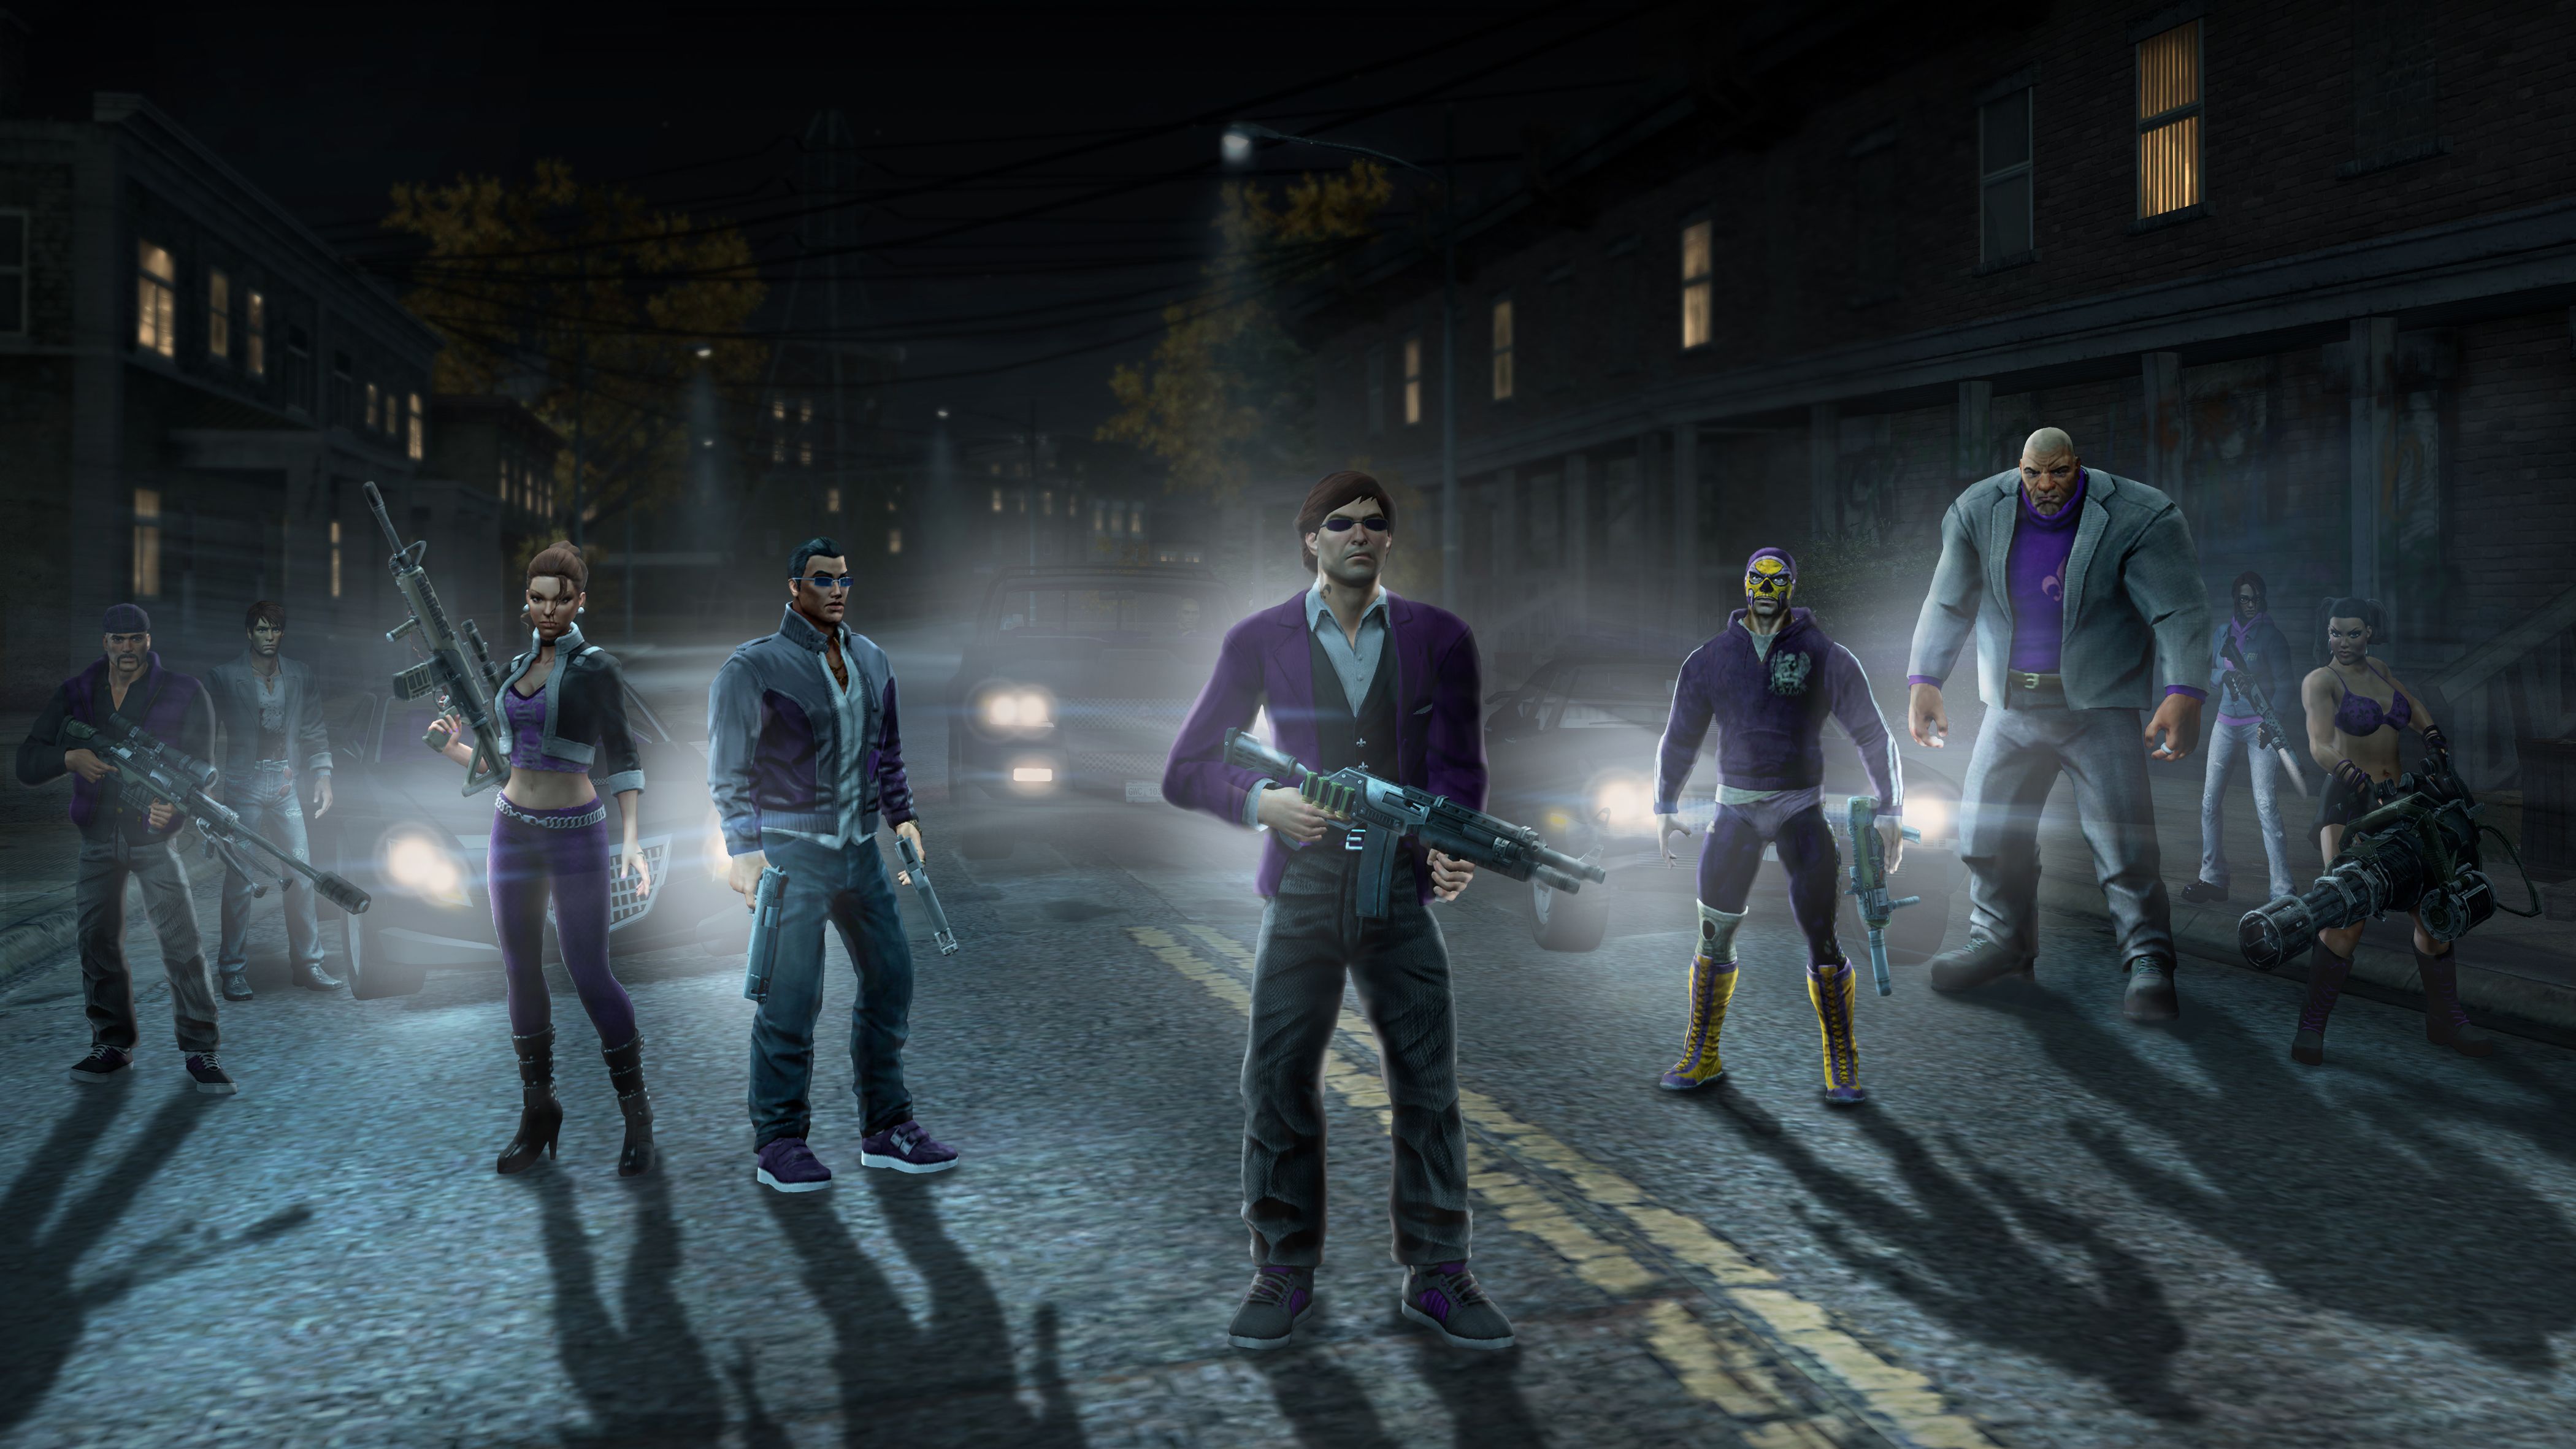 Saints Row gameplay is looking good so far. How are we feeling